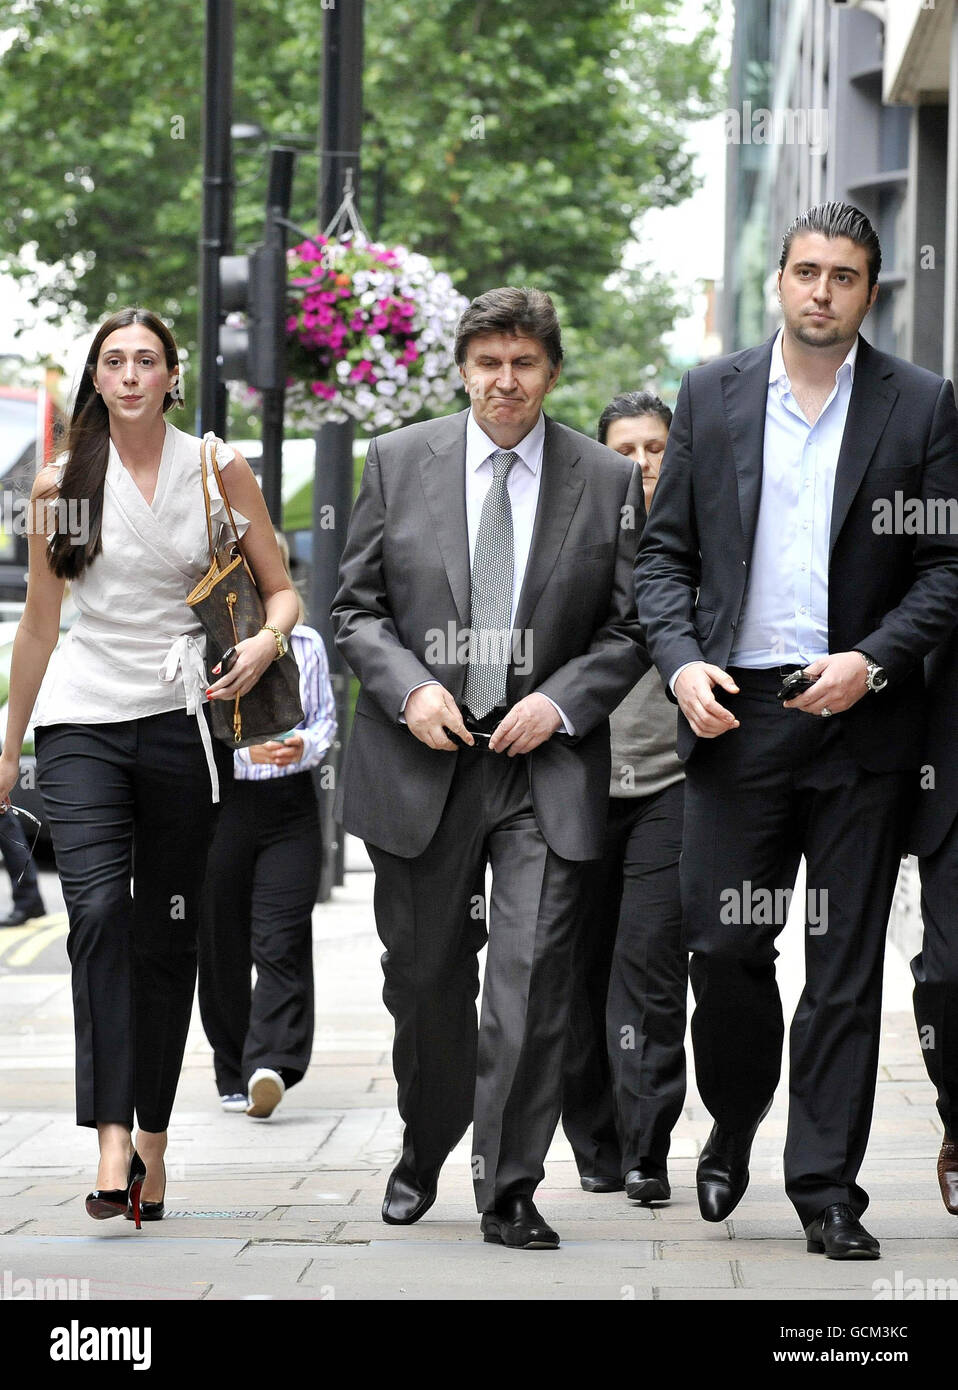 Former Bosnian leader Ejup Ganic (centre) arrives at Westminster Magistrates' Court accompanied by his daughter Emina and son Emir, where a judge is to decide whether to extradite him to Serbia over alleged war crimes. Stock Photo